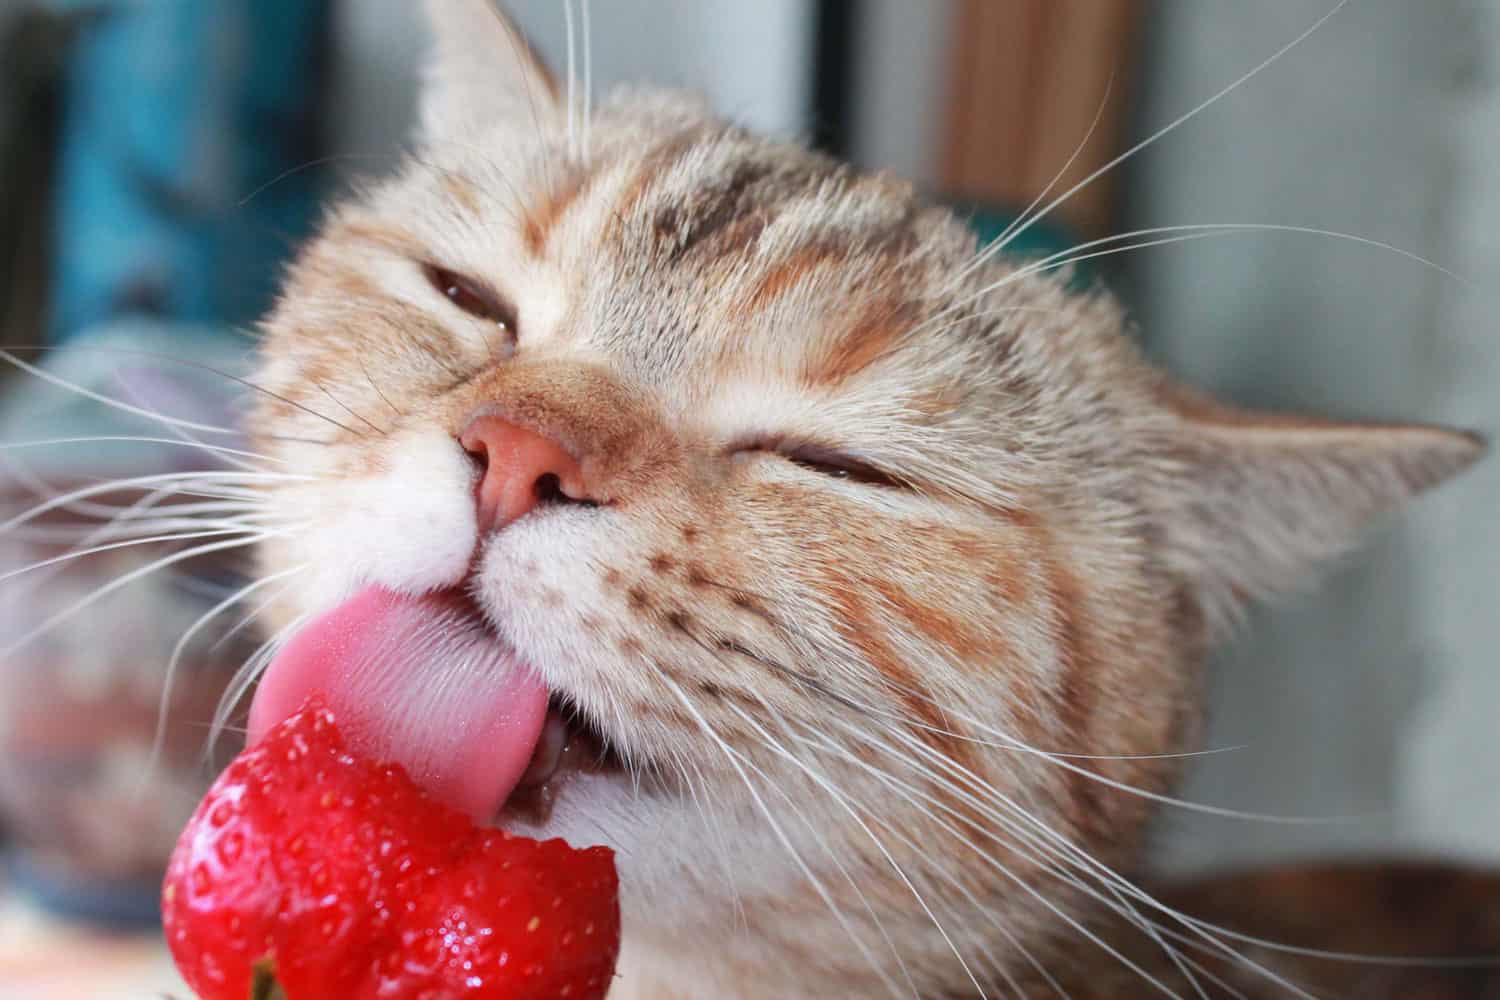 A cat licking a delicious strawberries